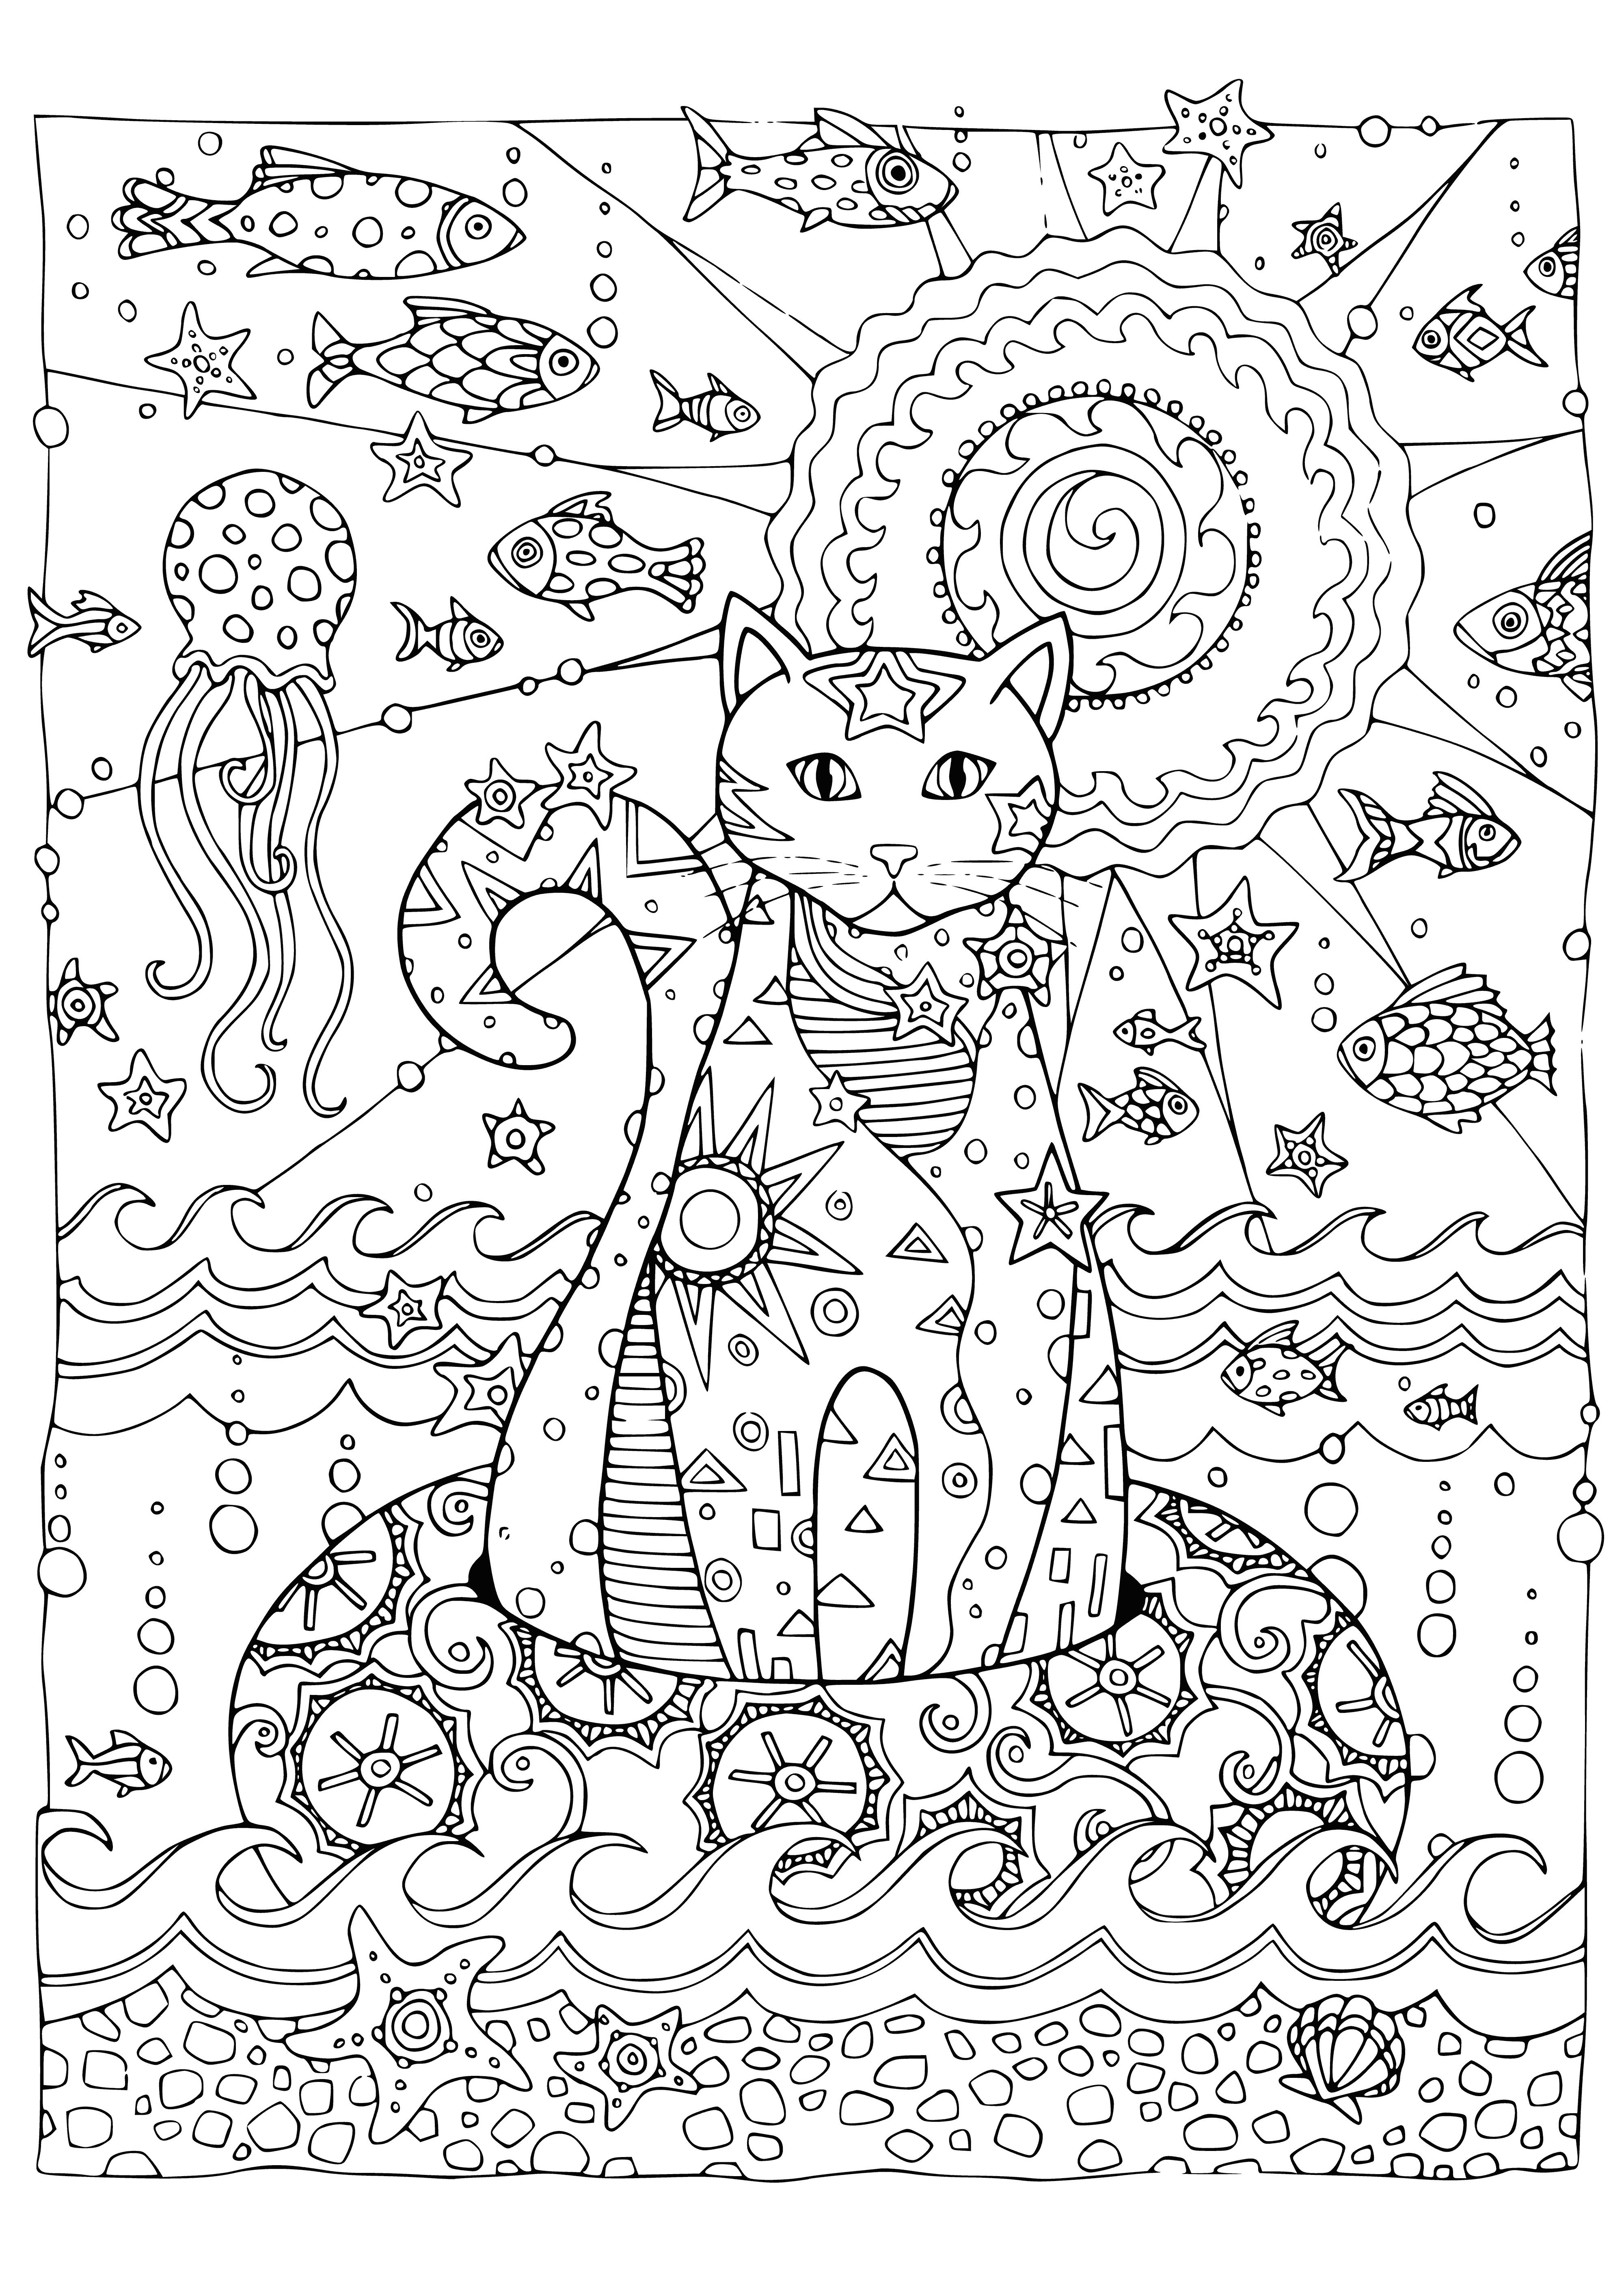 Sea cat coloring page